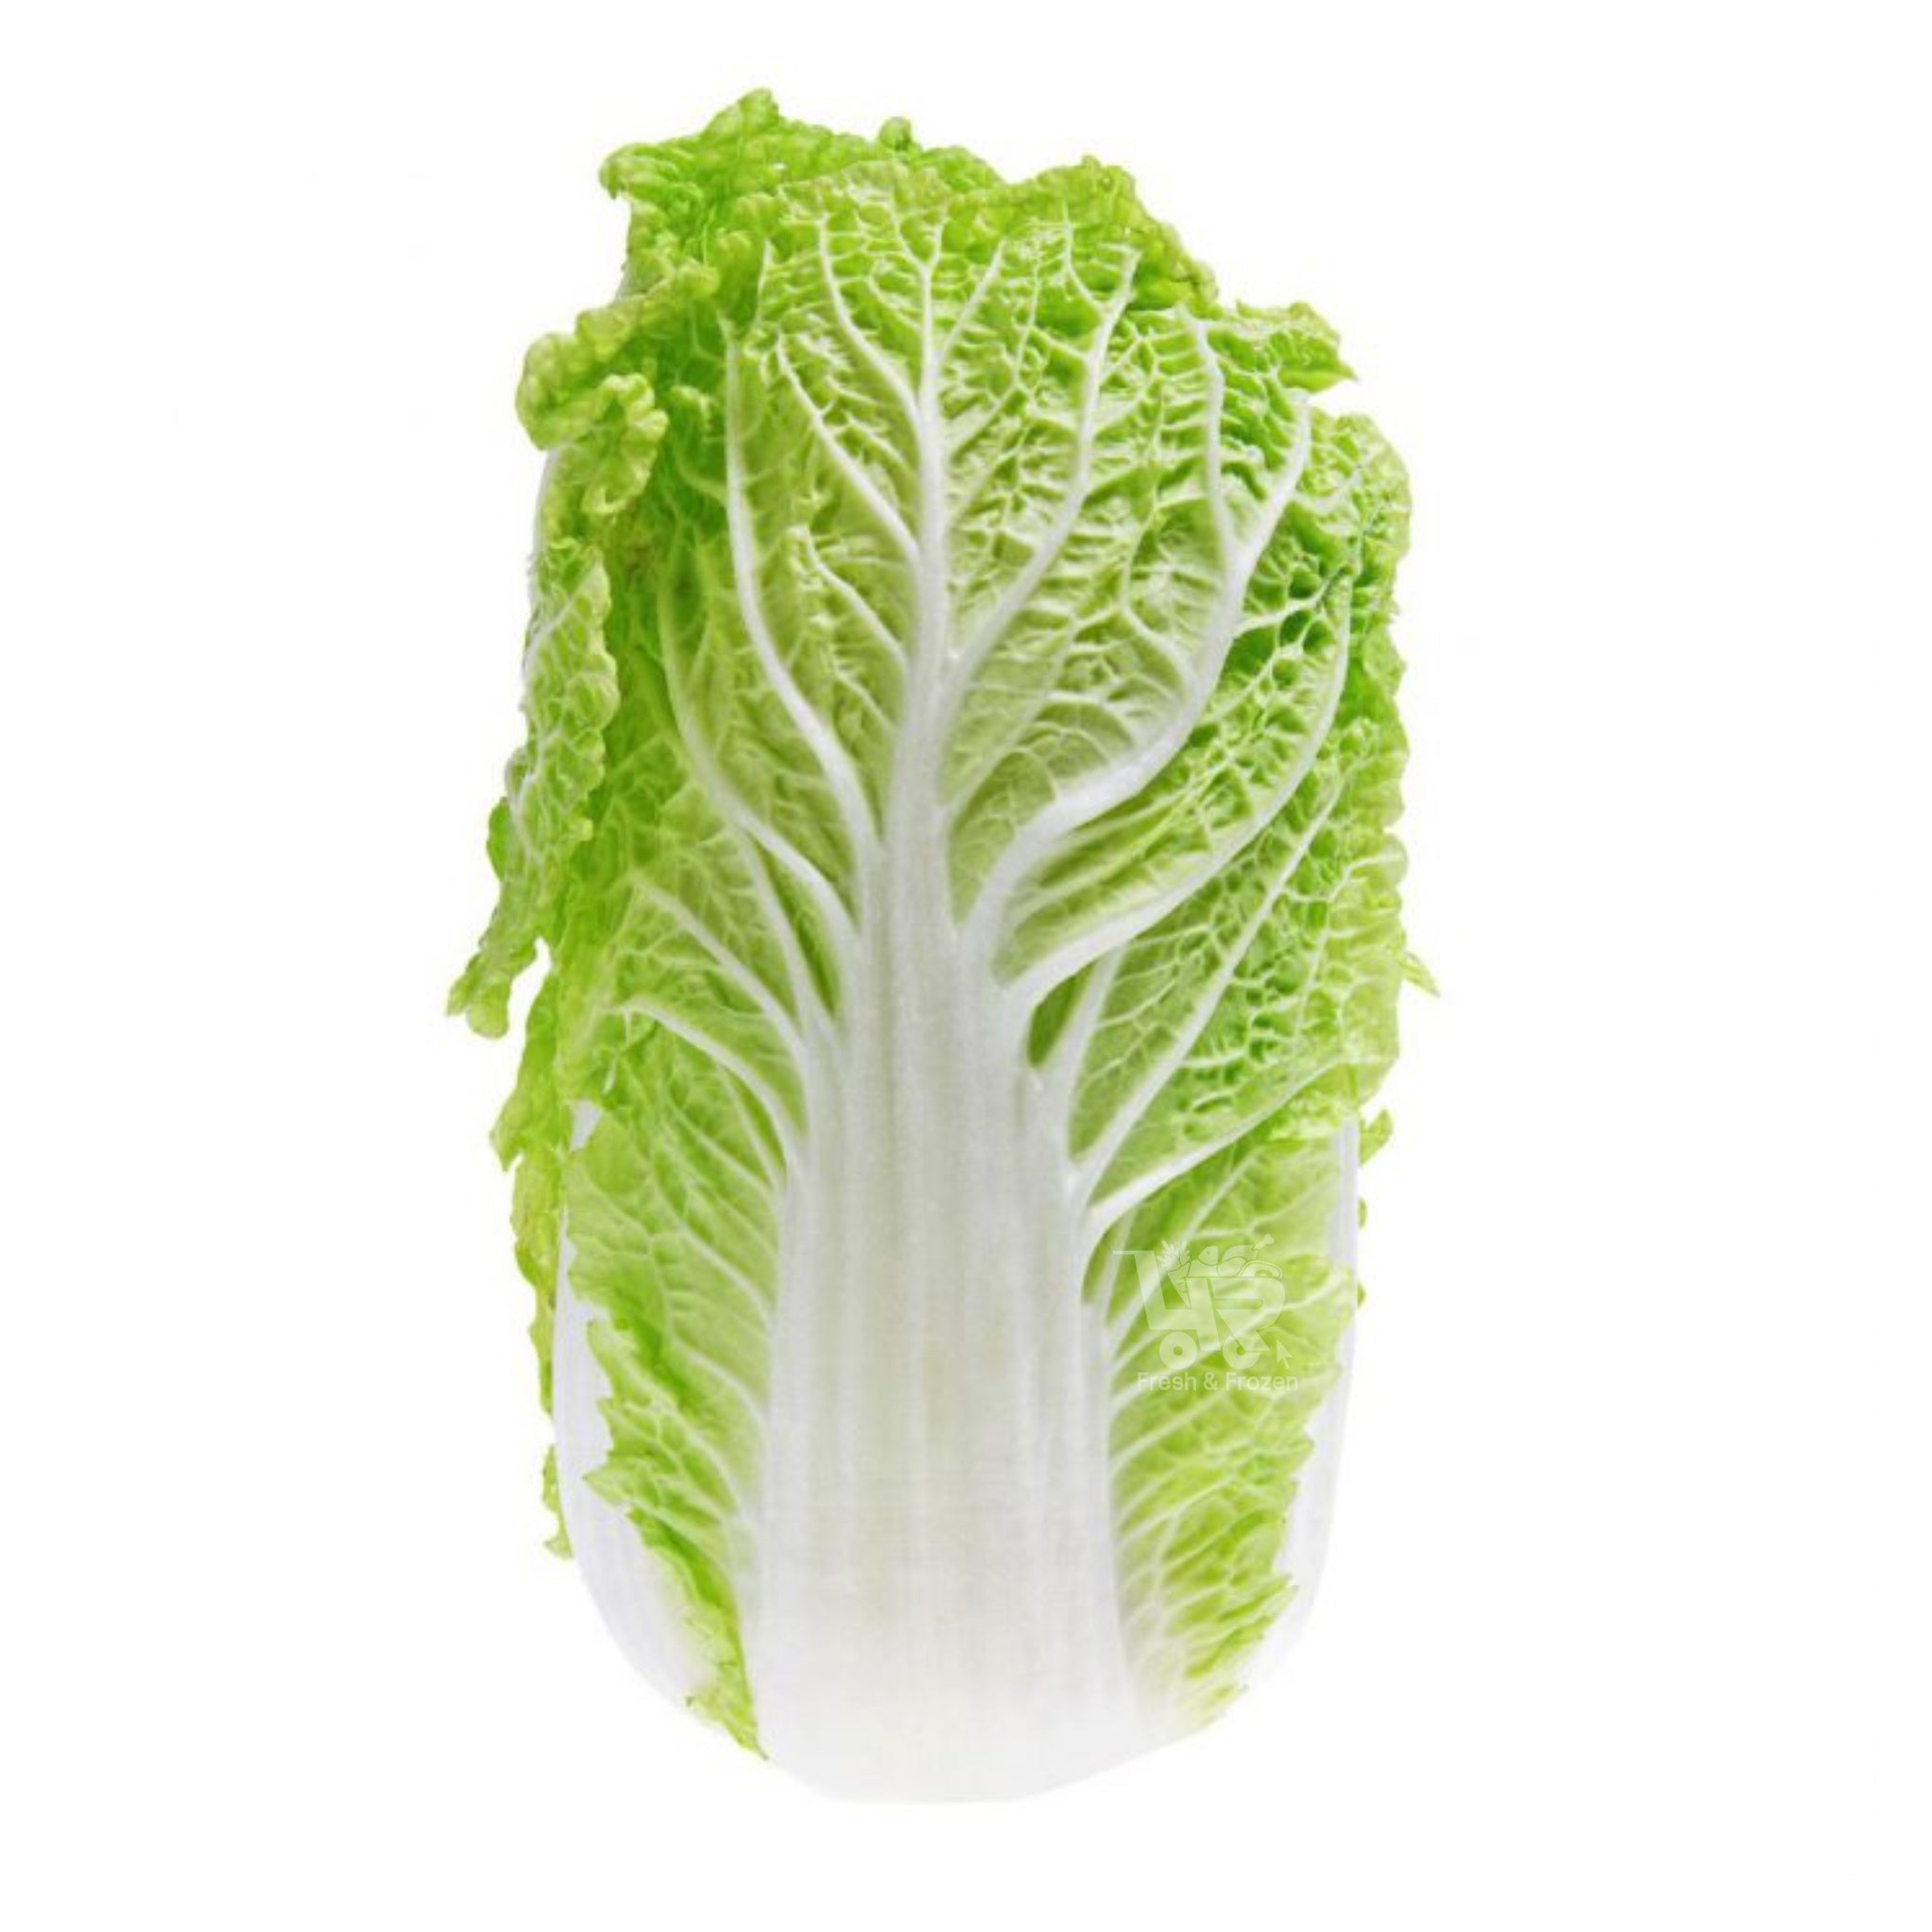 Pechay Wombok Chinese Cabbage Baguio Pechay – 4r Fresh And Frozen